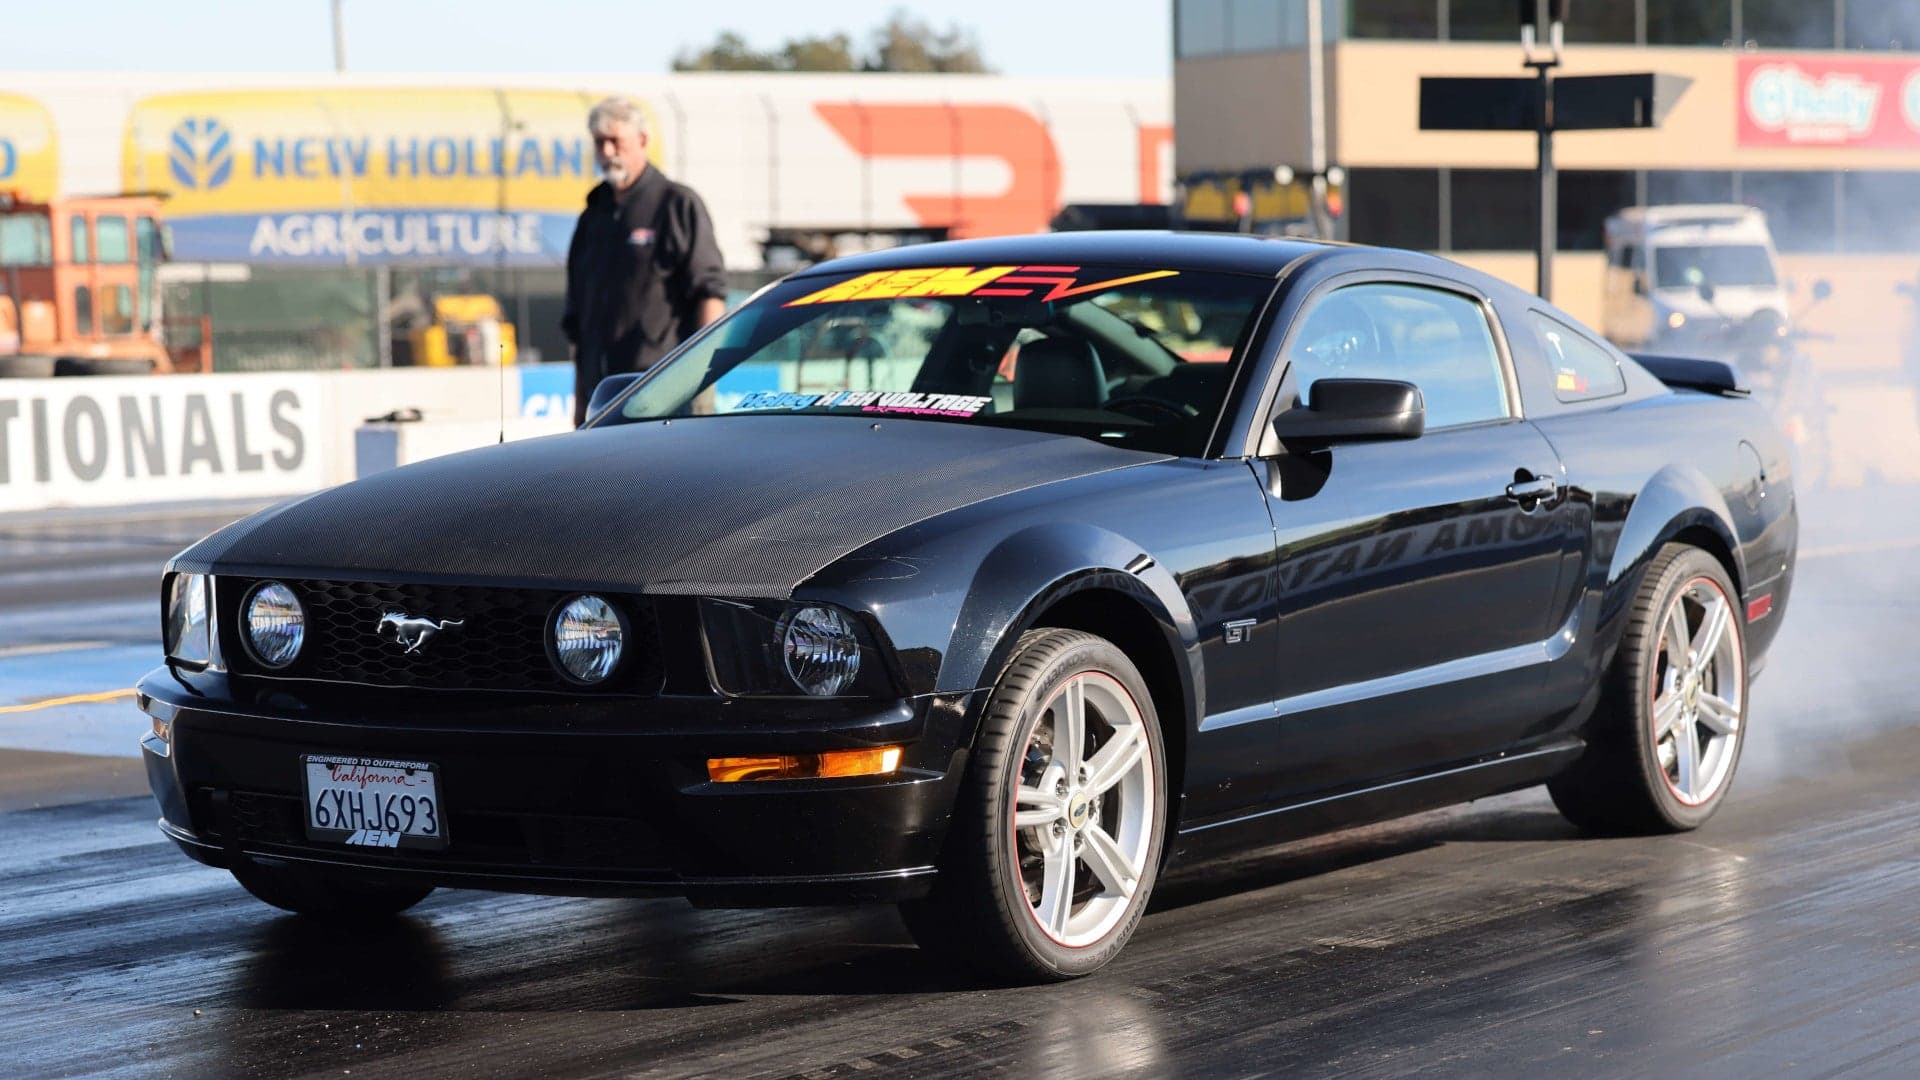 This Tesla-Swapped Mustang Is Another Take on an Electric Mustang